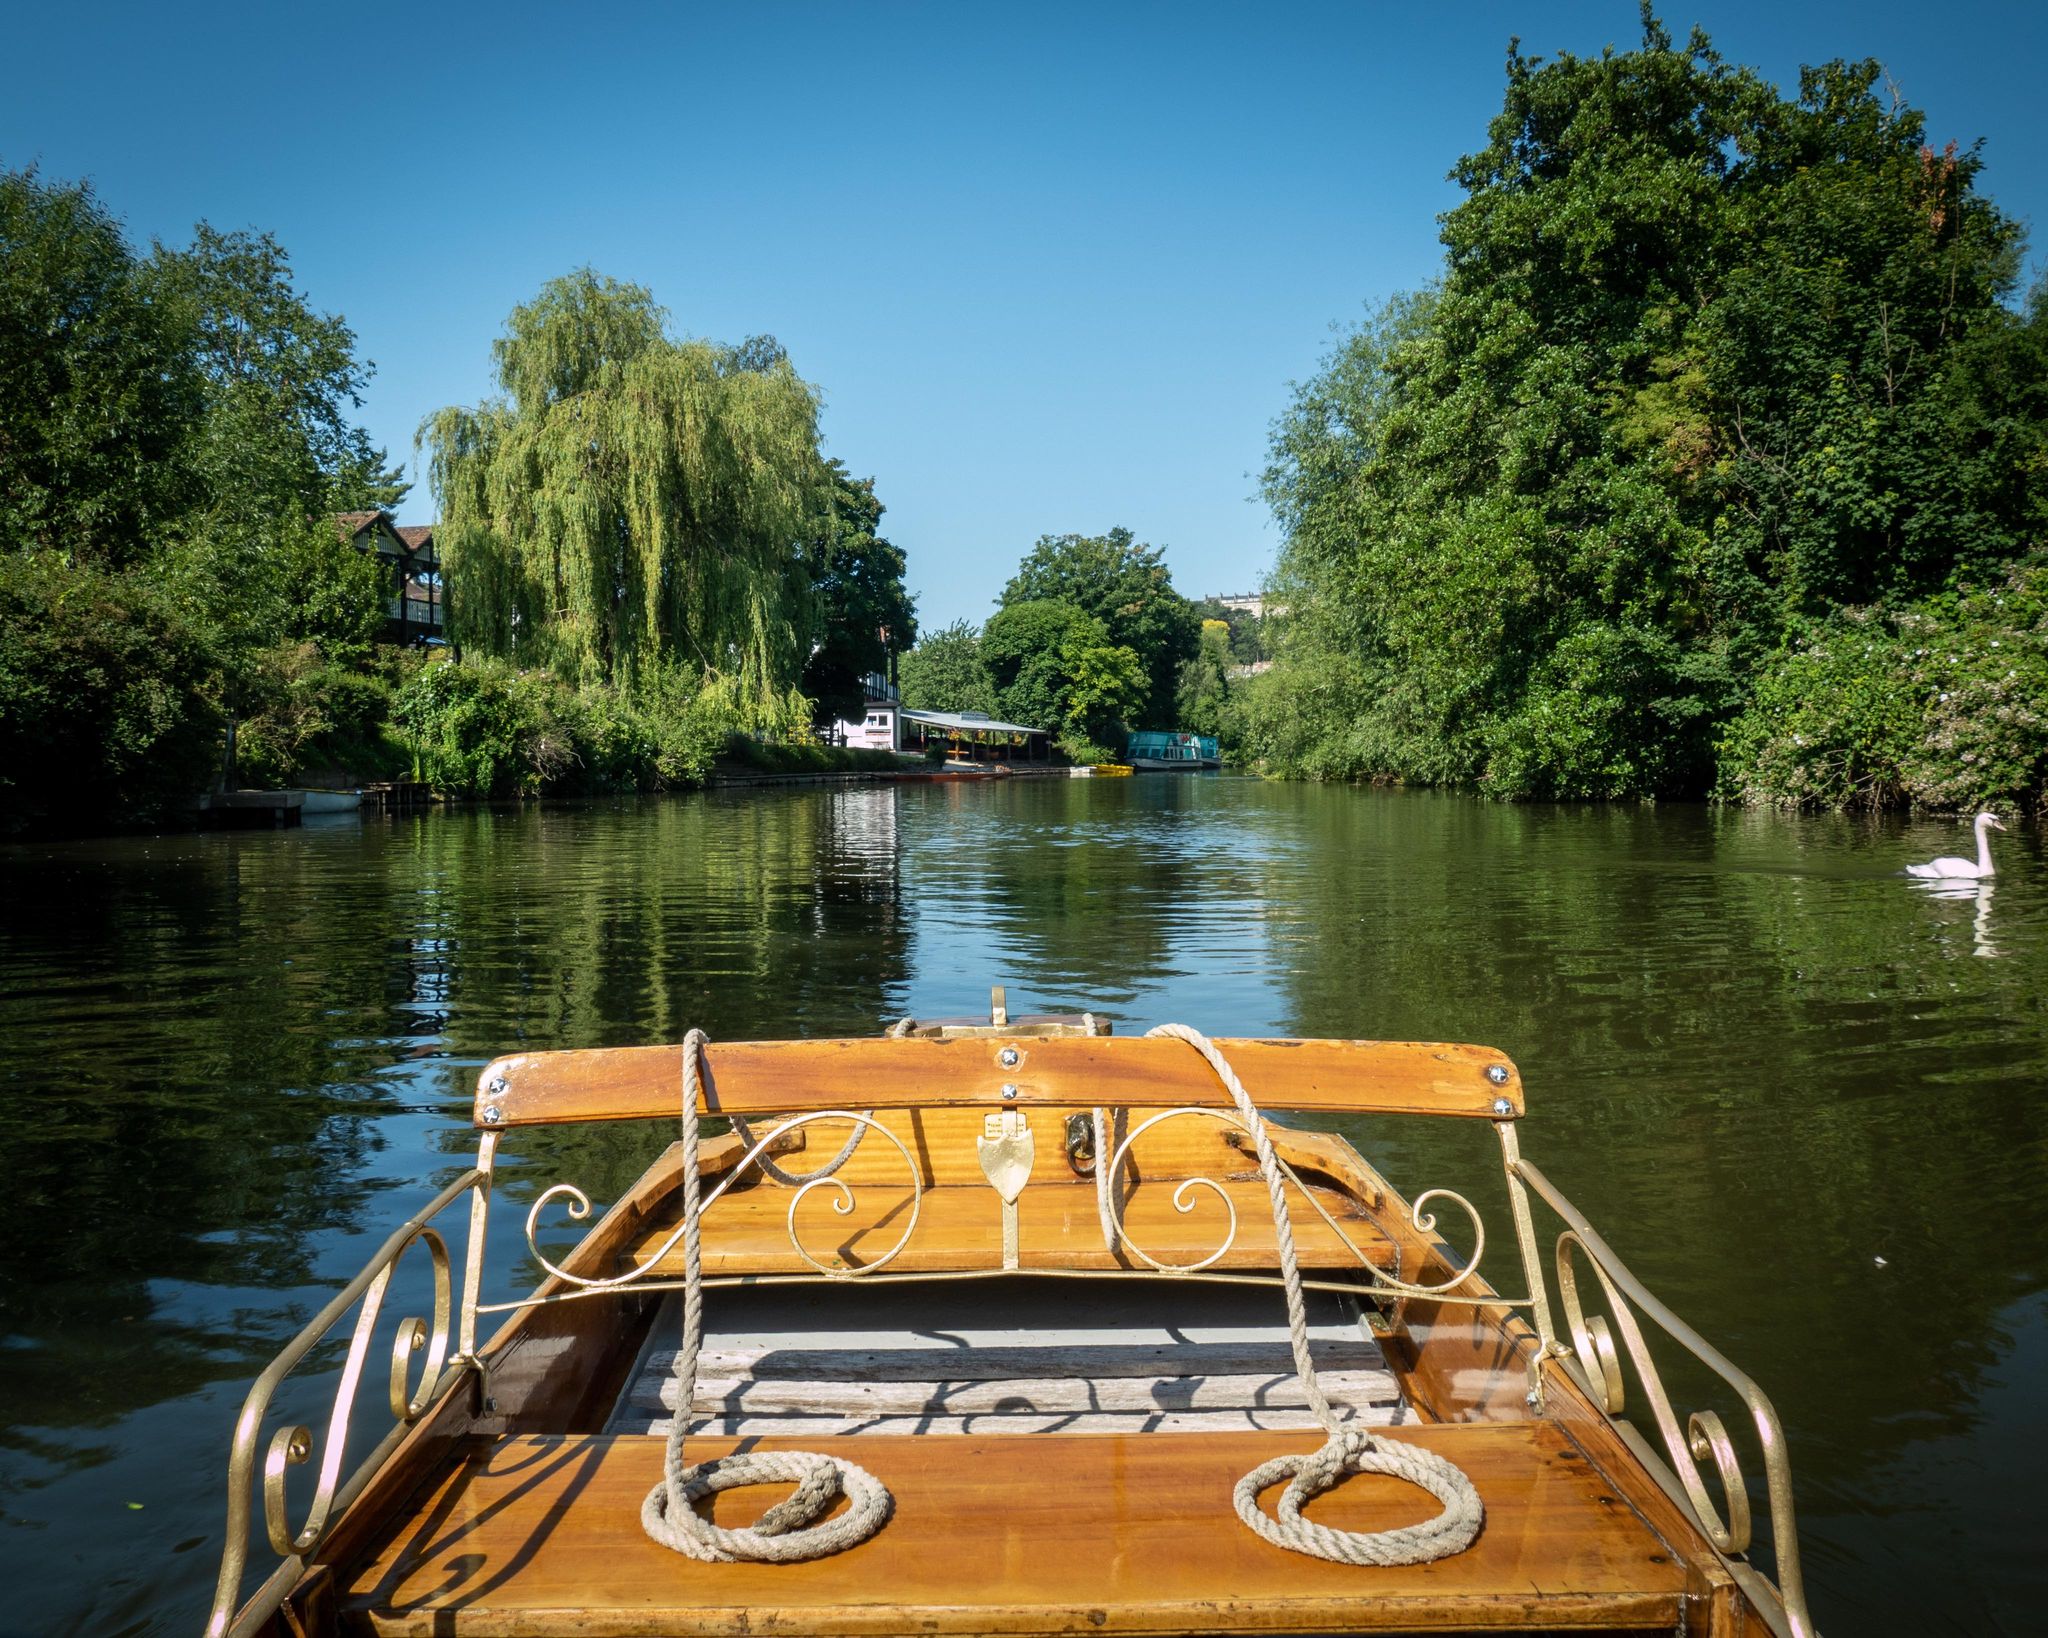 The river Avon and the front of a boat, as viewed from the boat.